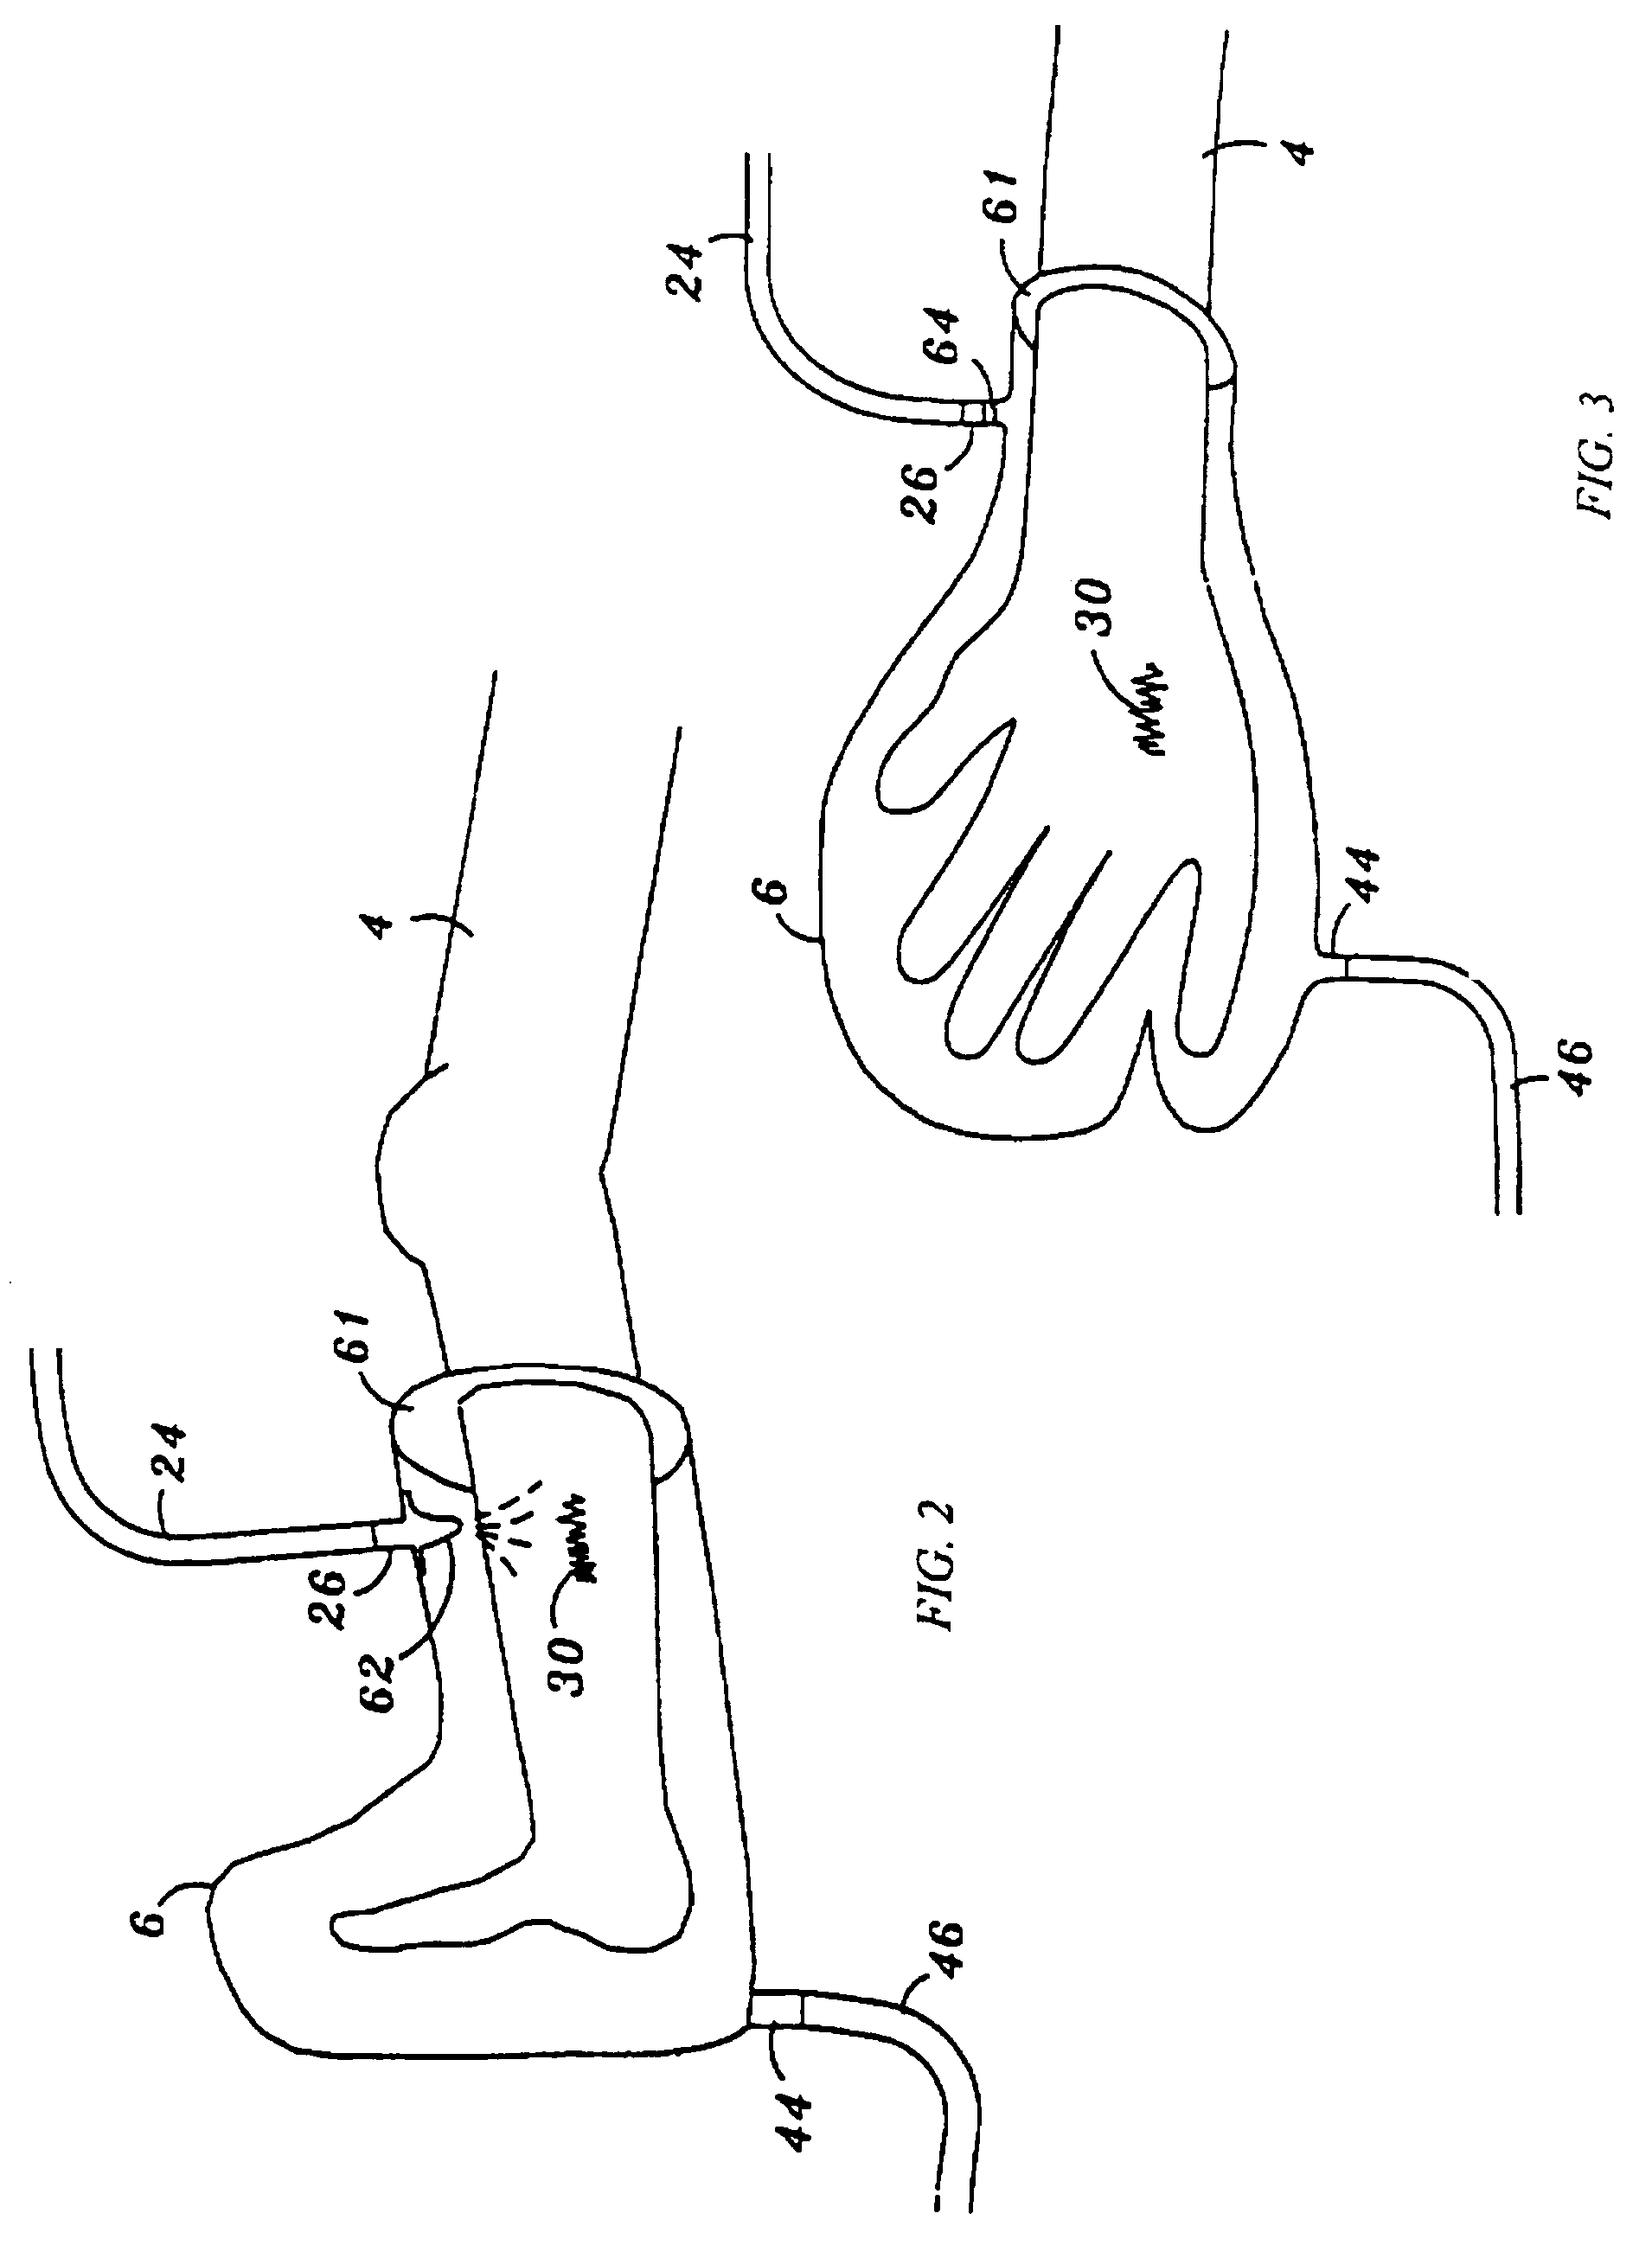 Device and method for treatment of wounds with nitric oxide